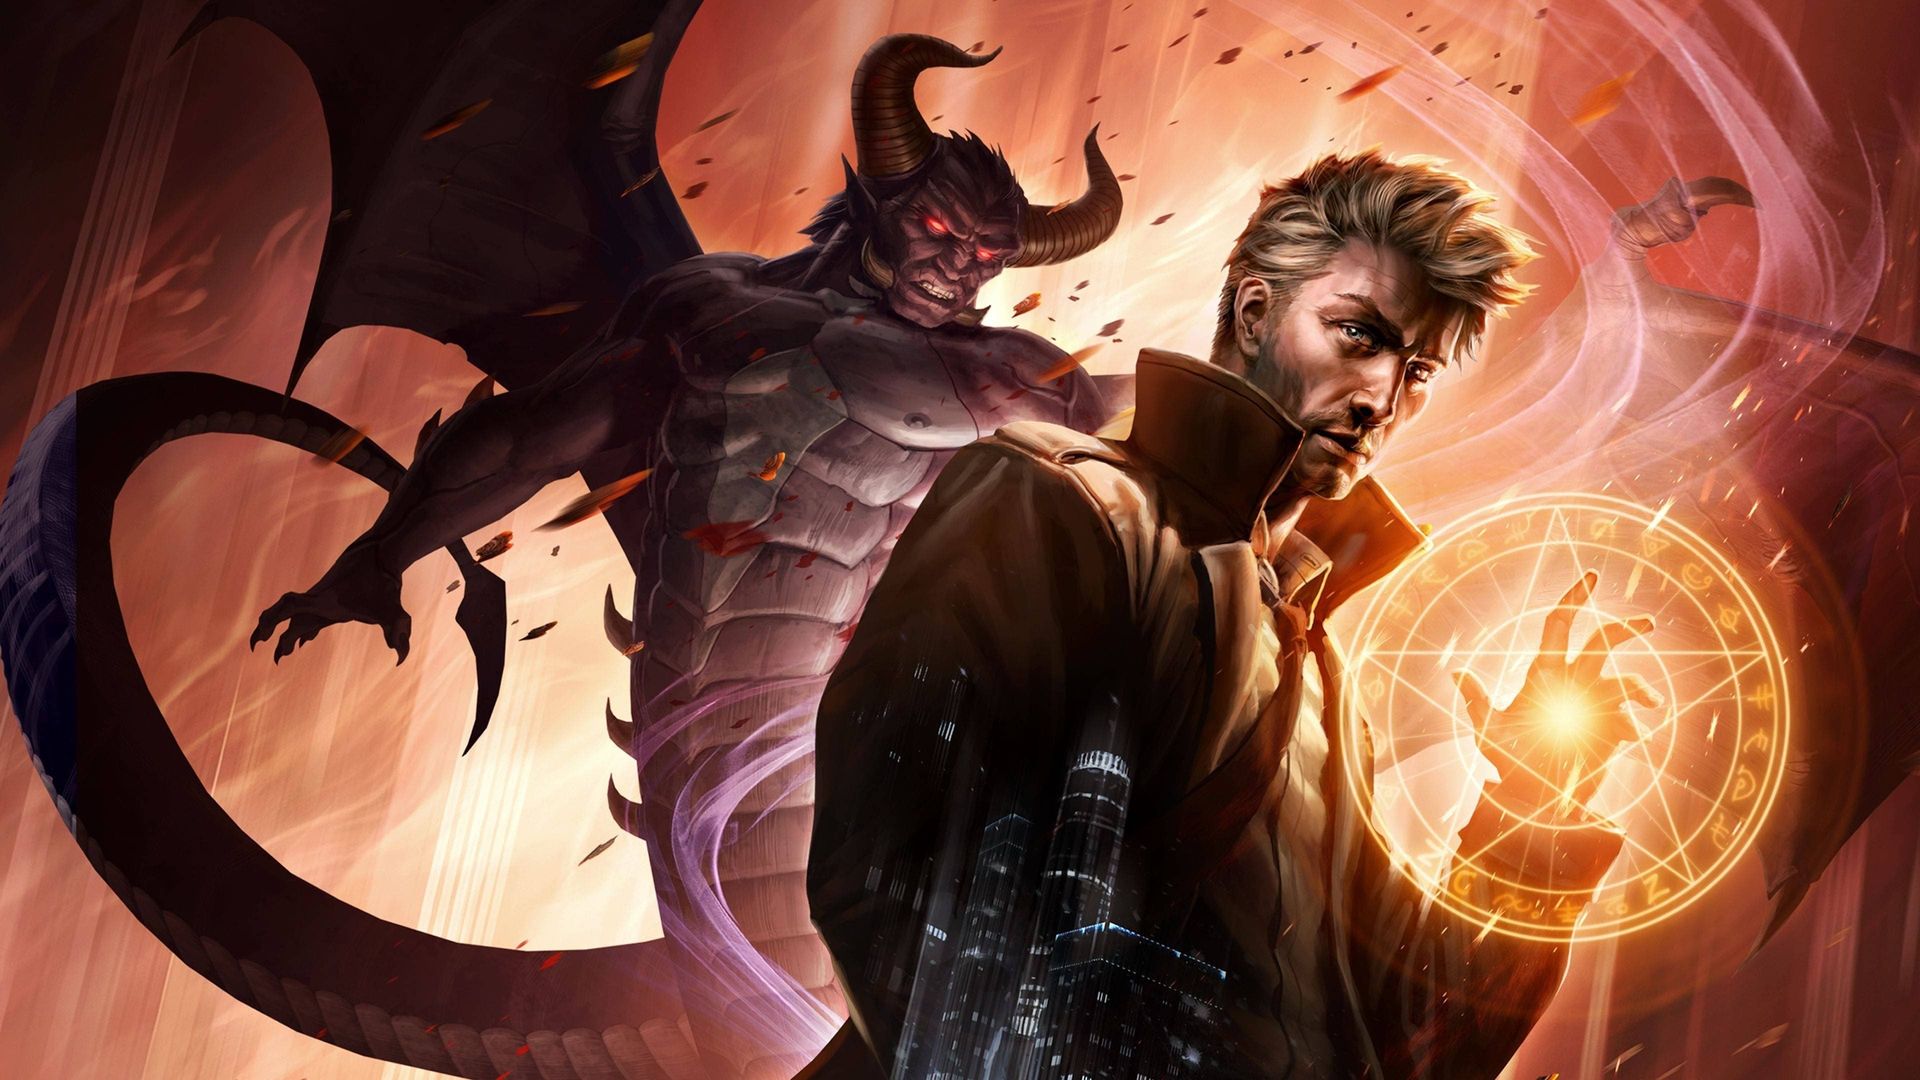 Constantine: City of Demons background